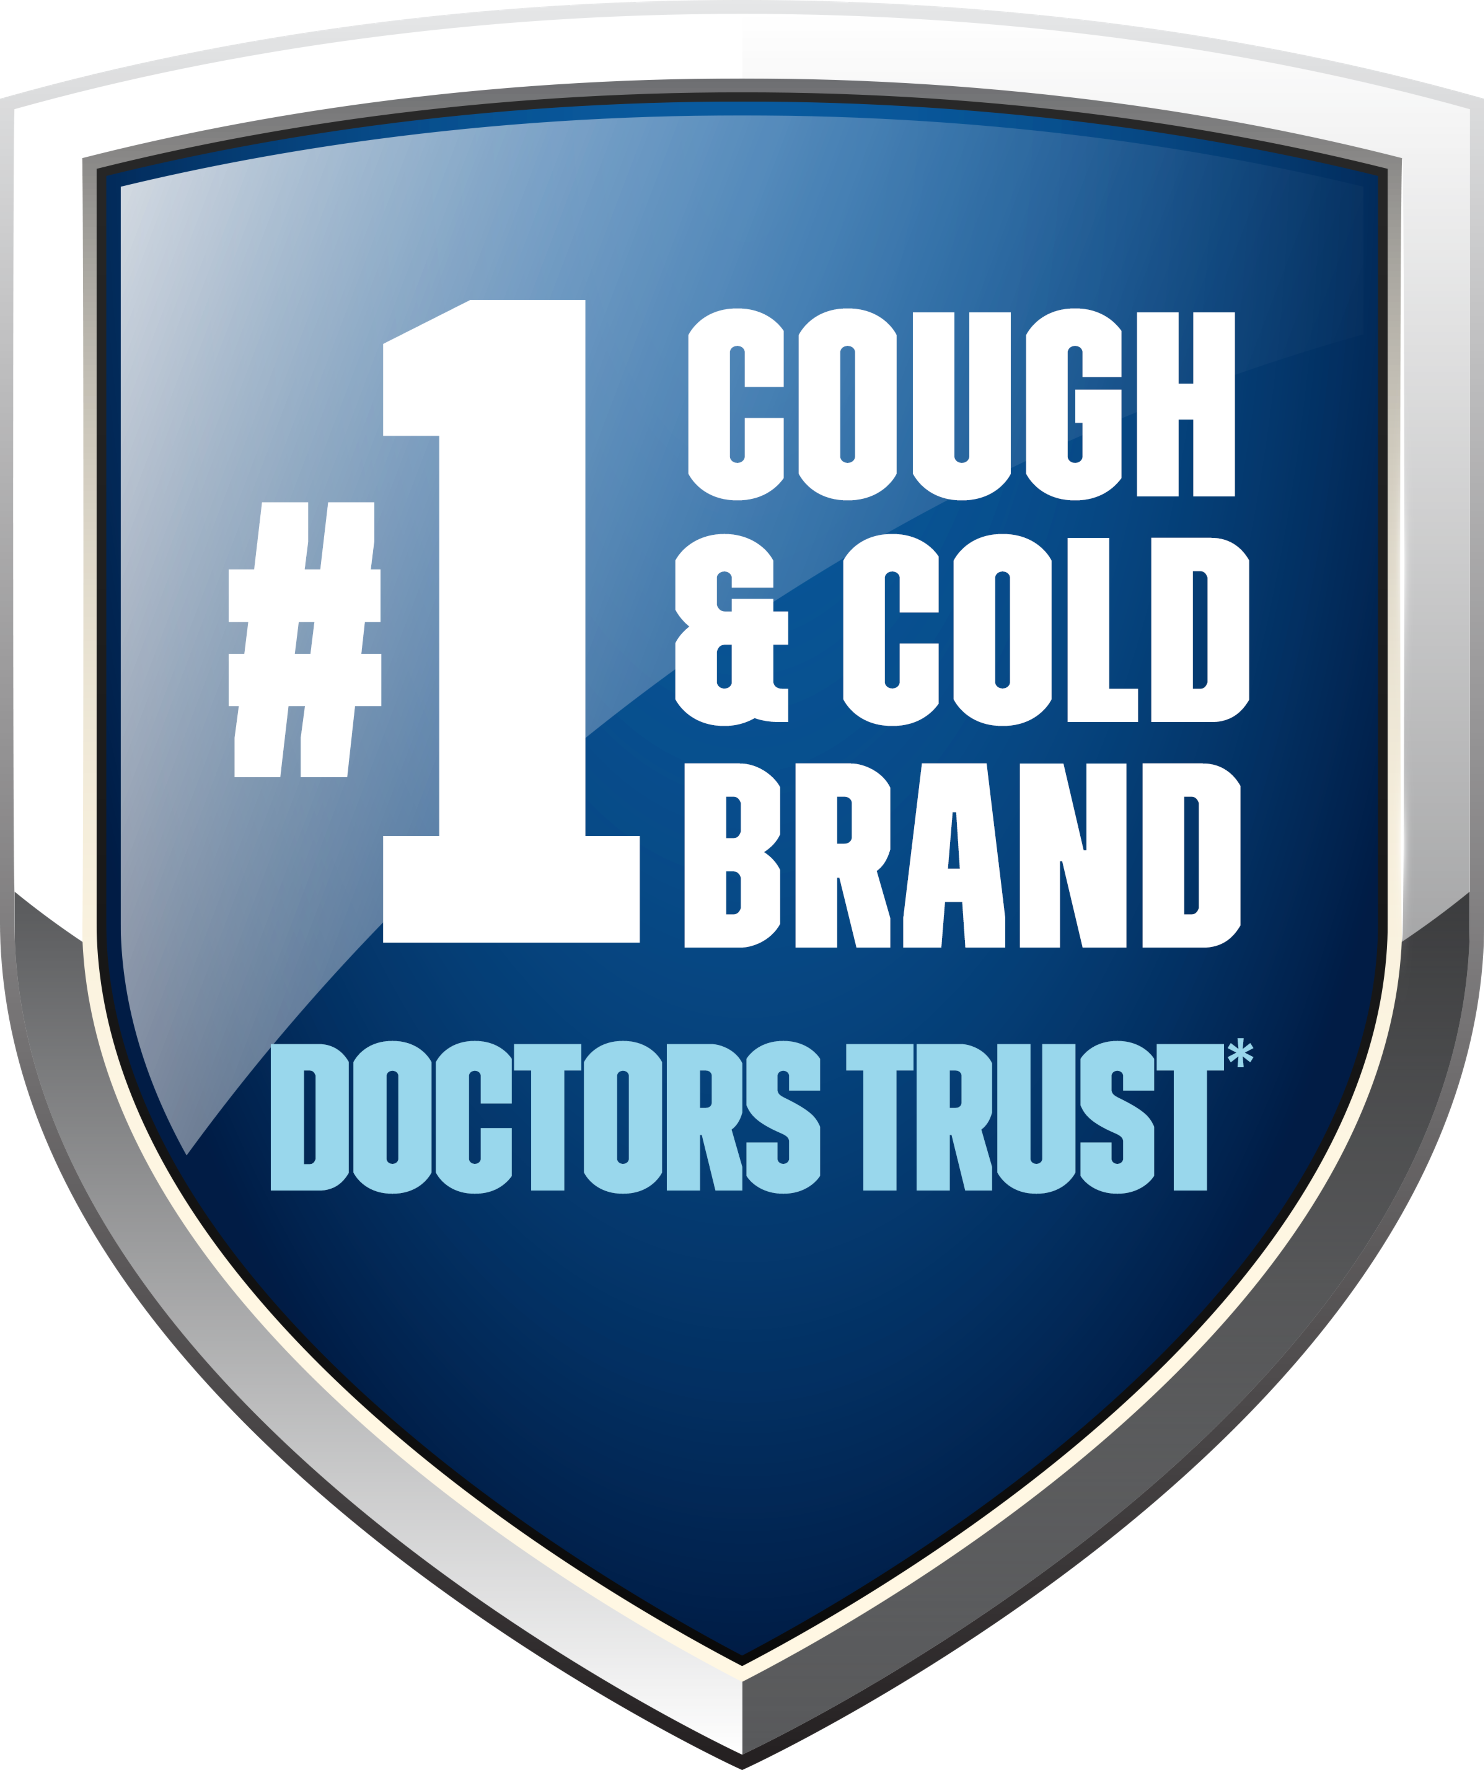 No.1 cough & cold brand - doctor's trust badge icon